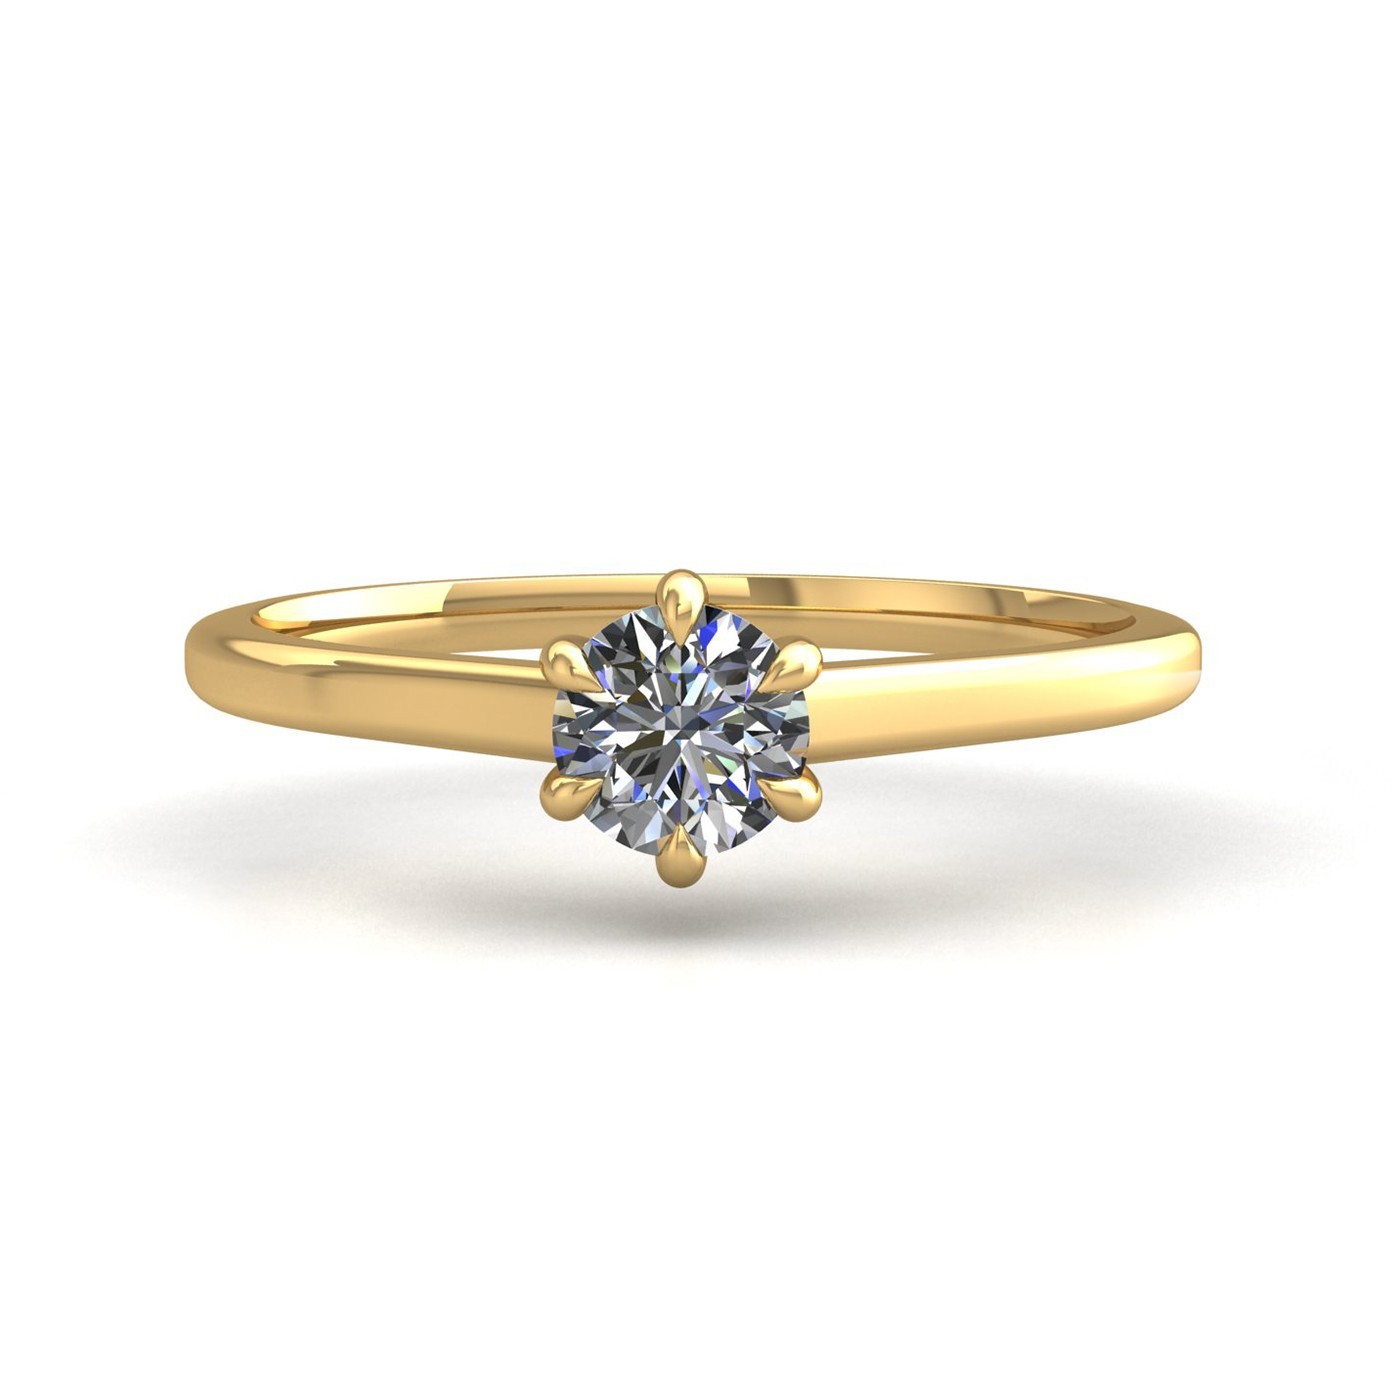 18k yellow gold 2,50 ct 6 prongs solitaire round cut diamond engagement ring with whisper thin band Photos & images